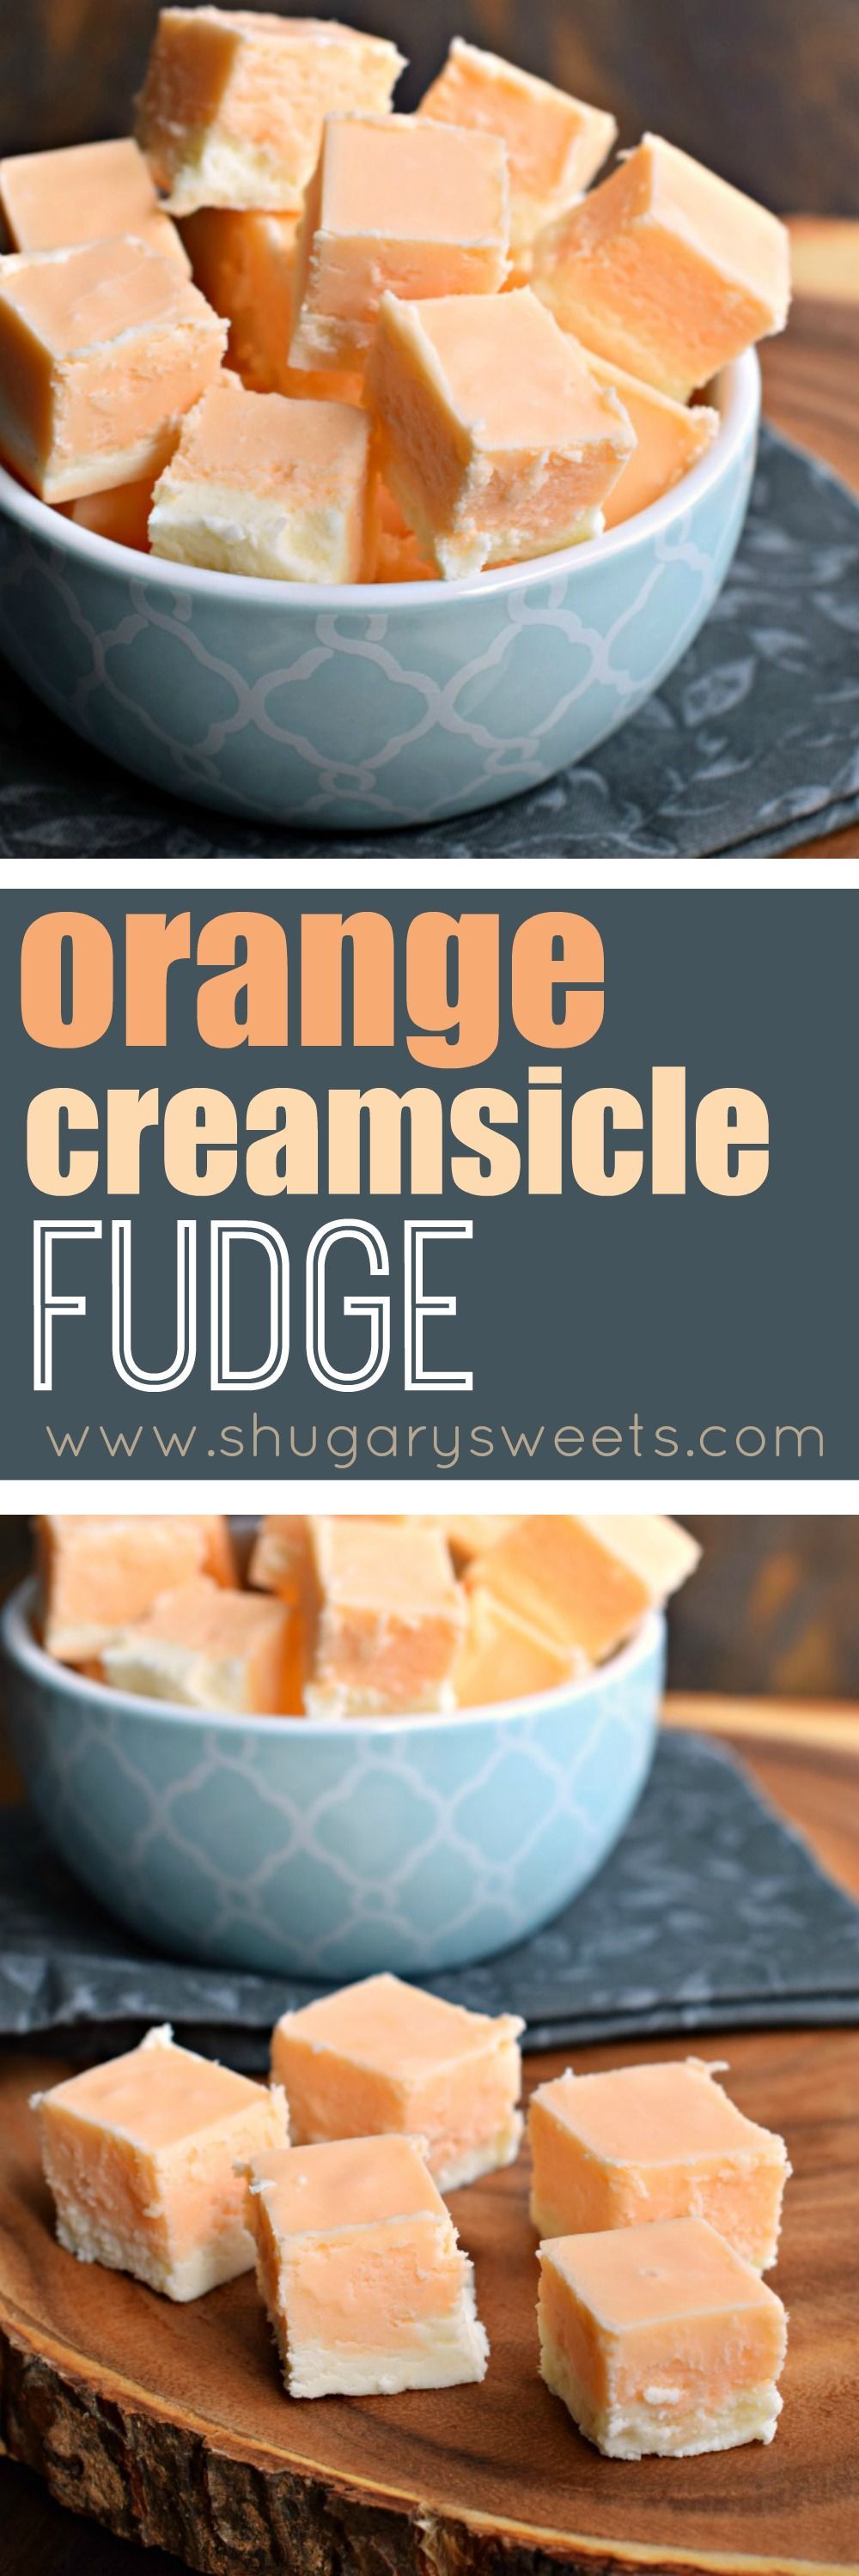 Orange Creamsicle Fudge is like your favorite ice cream treat from the truck – but it doesnt melt! Just the right amount of sweet